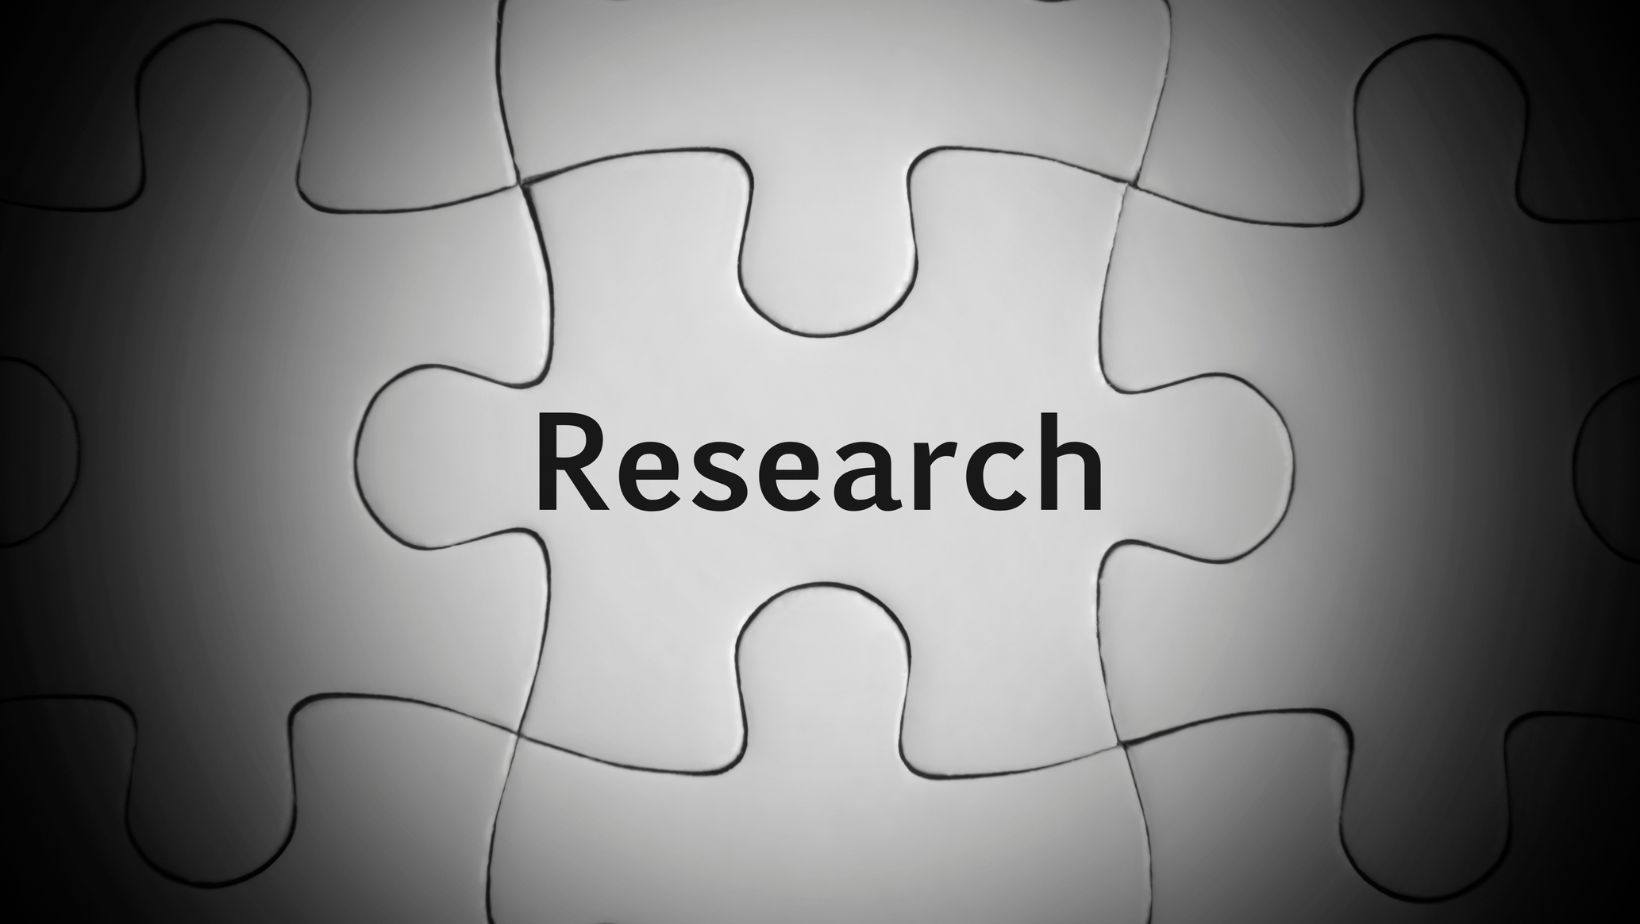 which of the following is the most effective strategy for preventing research misconduct?